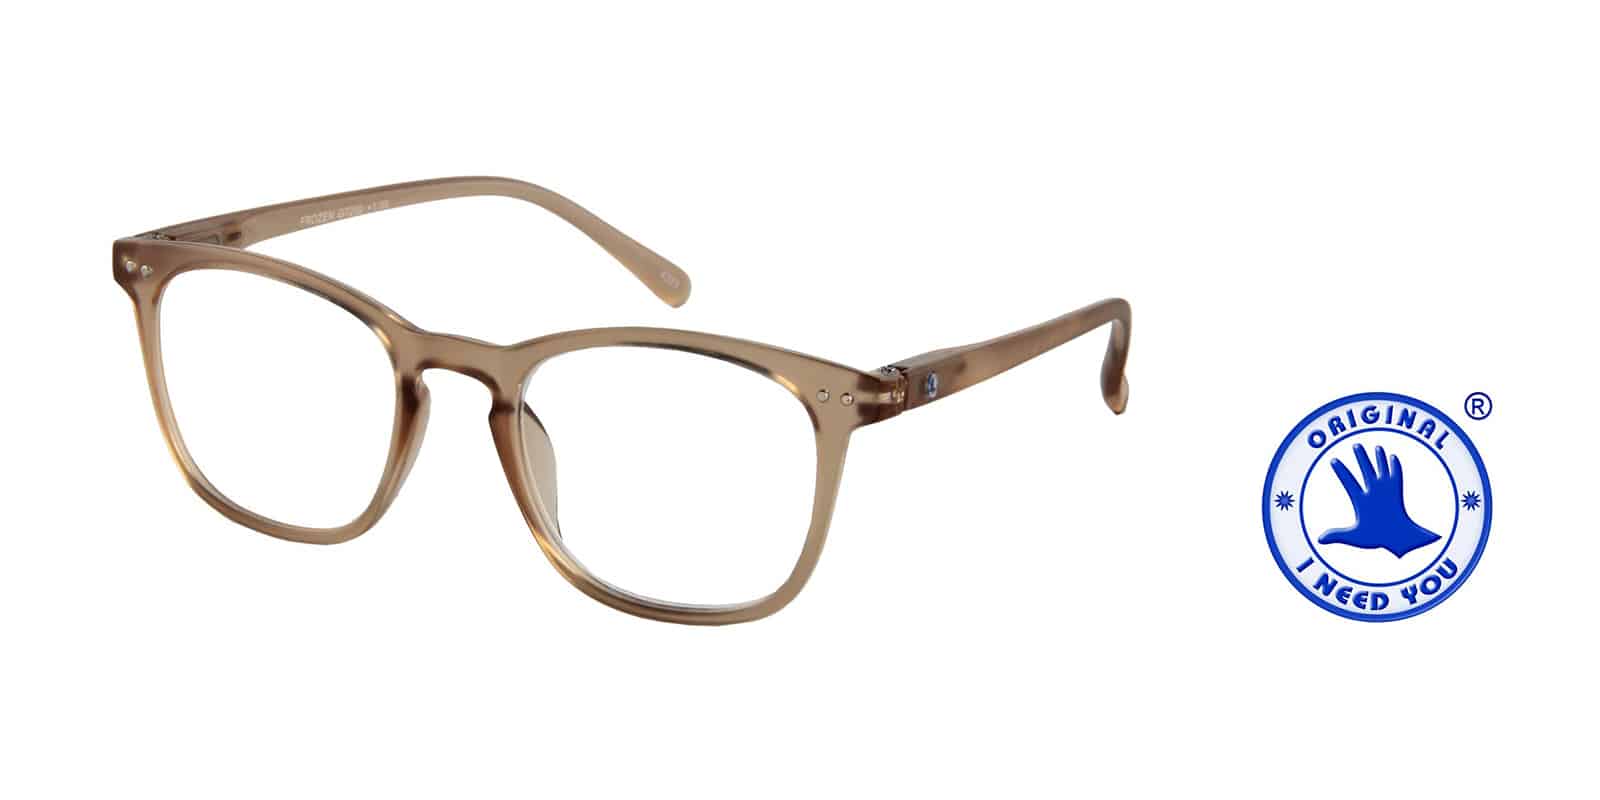 Lesebrille I Need You Frozen brown seitlich